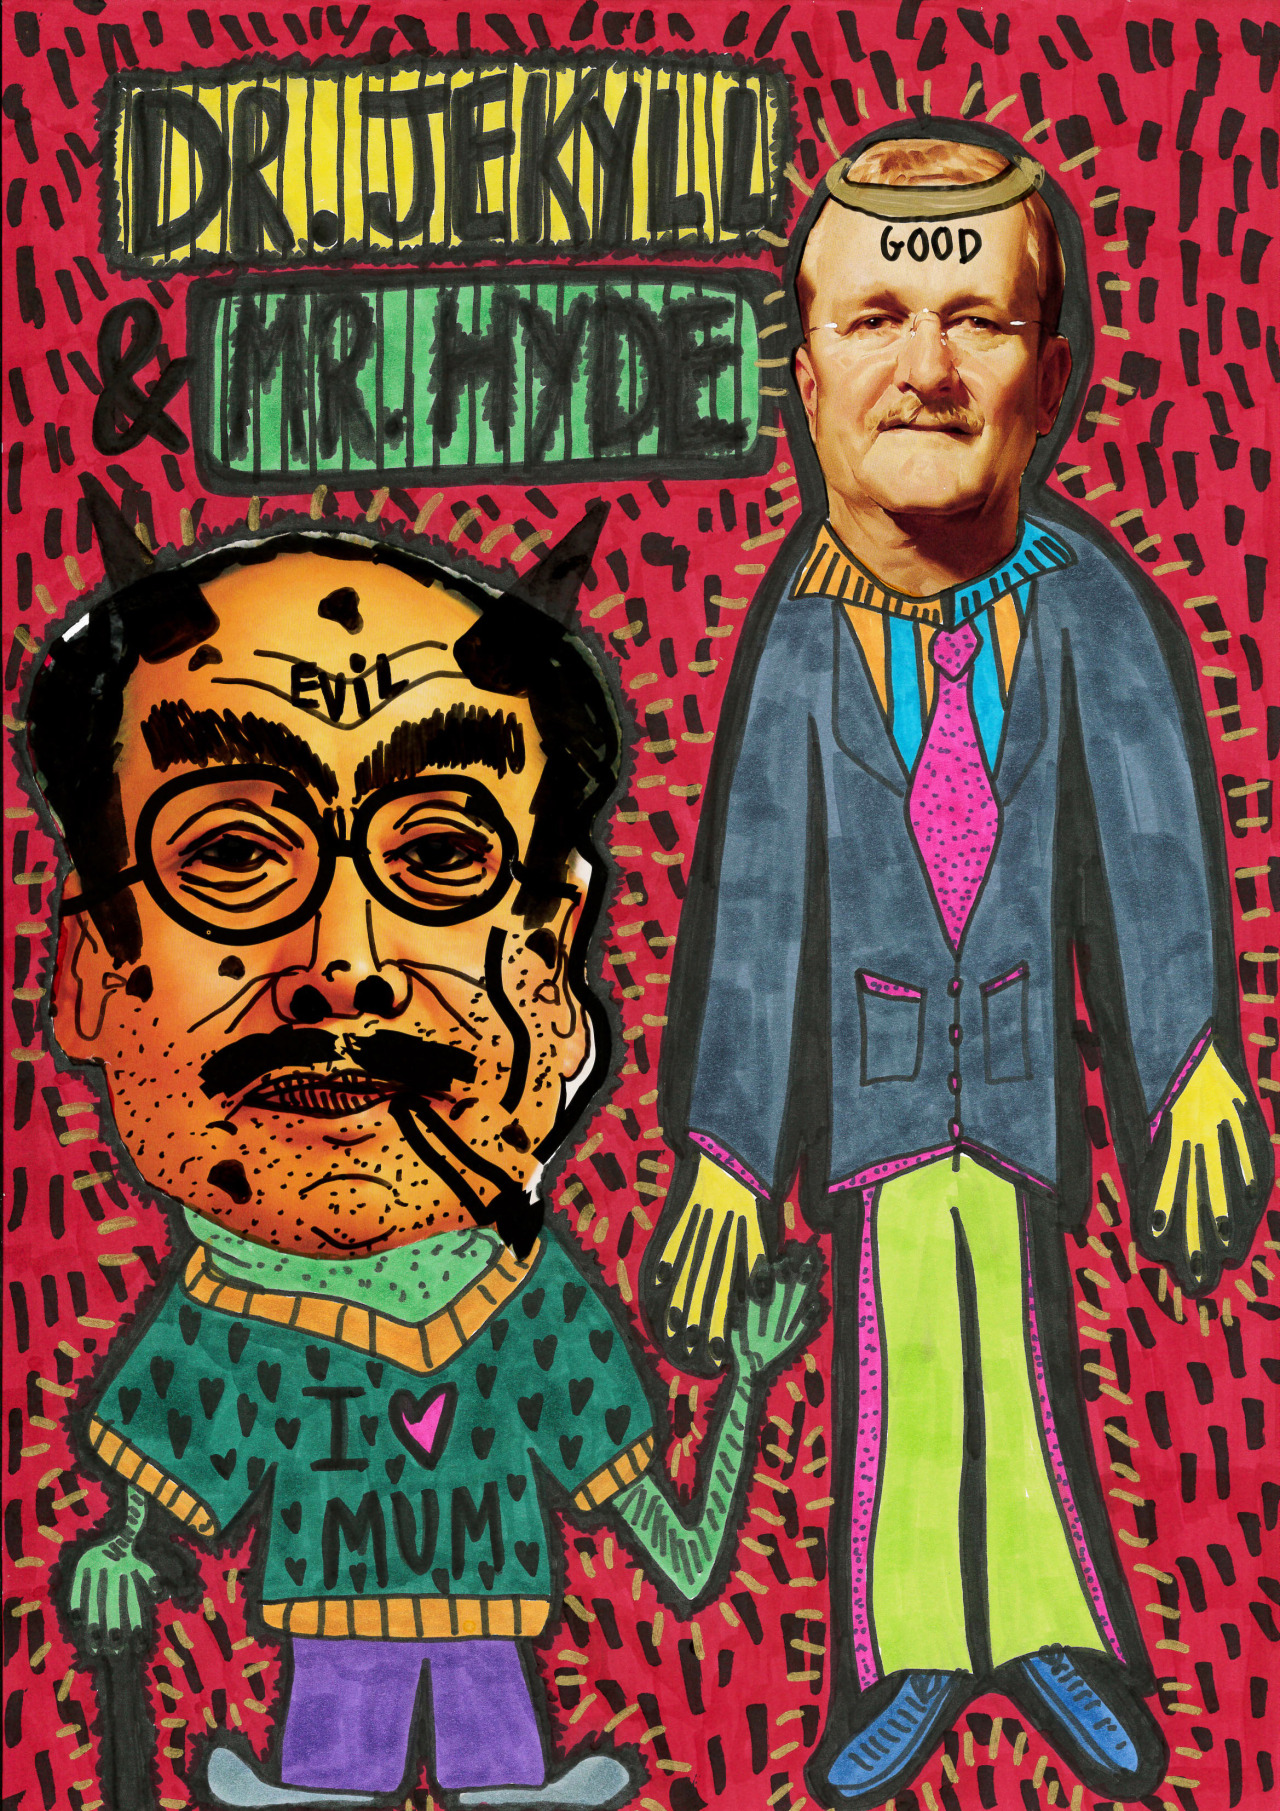    “Dr. Jekyll and Mr. Hyde” , 2013   Marker and mixed media on paper, 29.7 x 42 cm 